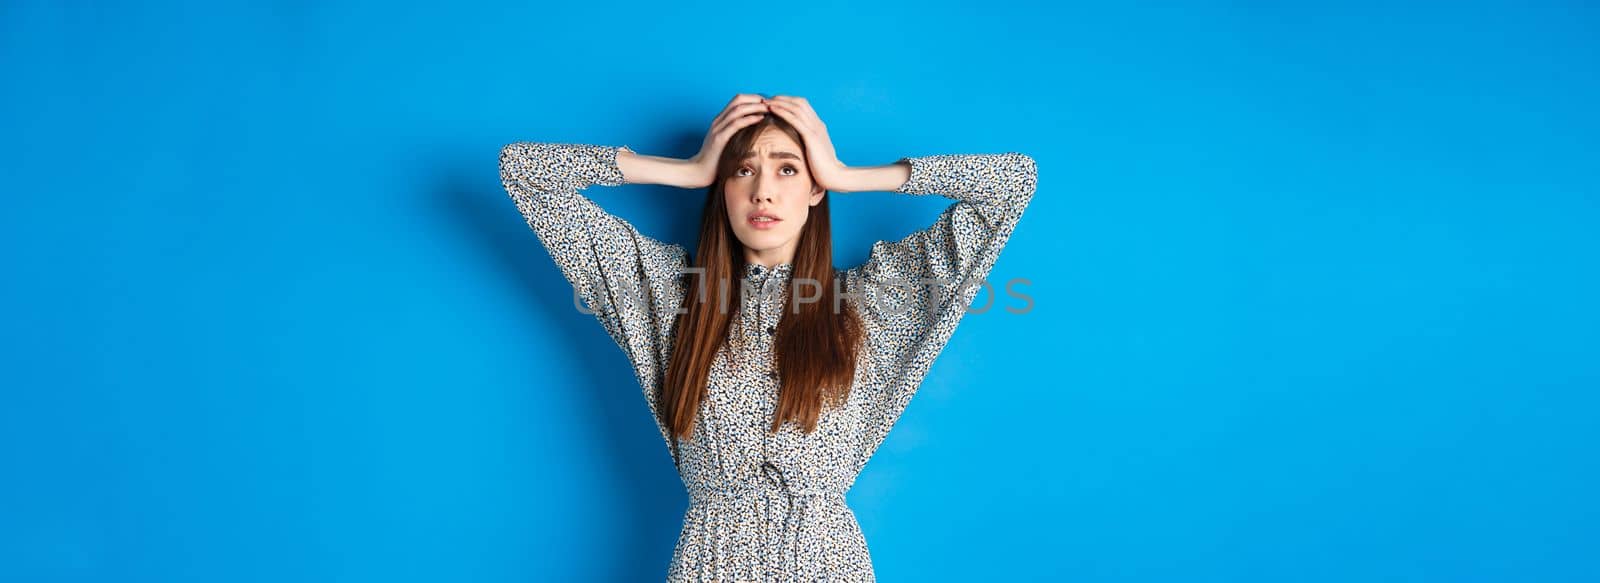 Troubled young woman with long hair, holding hands on head in panic, looking up nervous, having problem, standing on blue background.